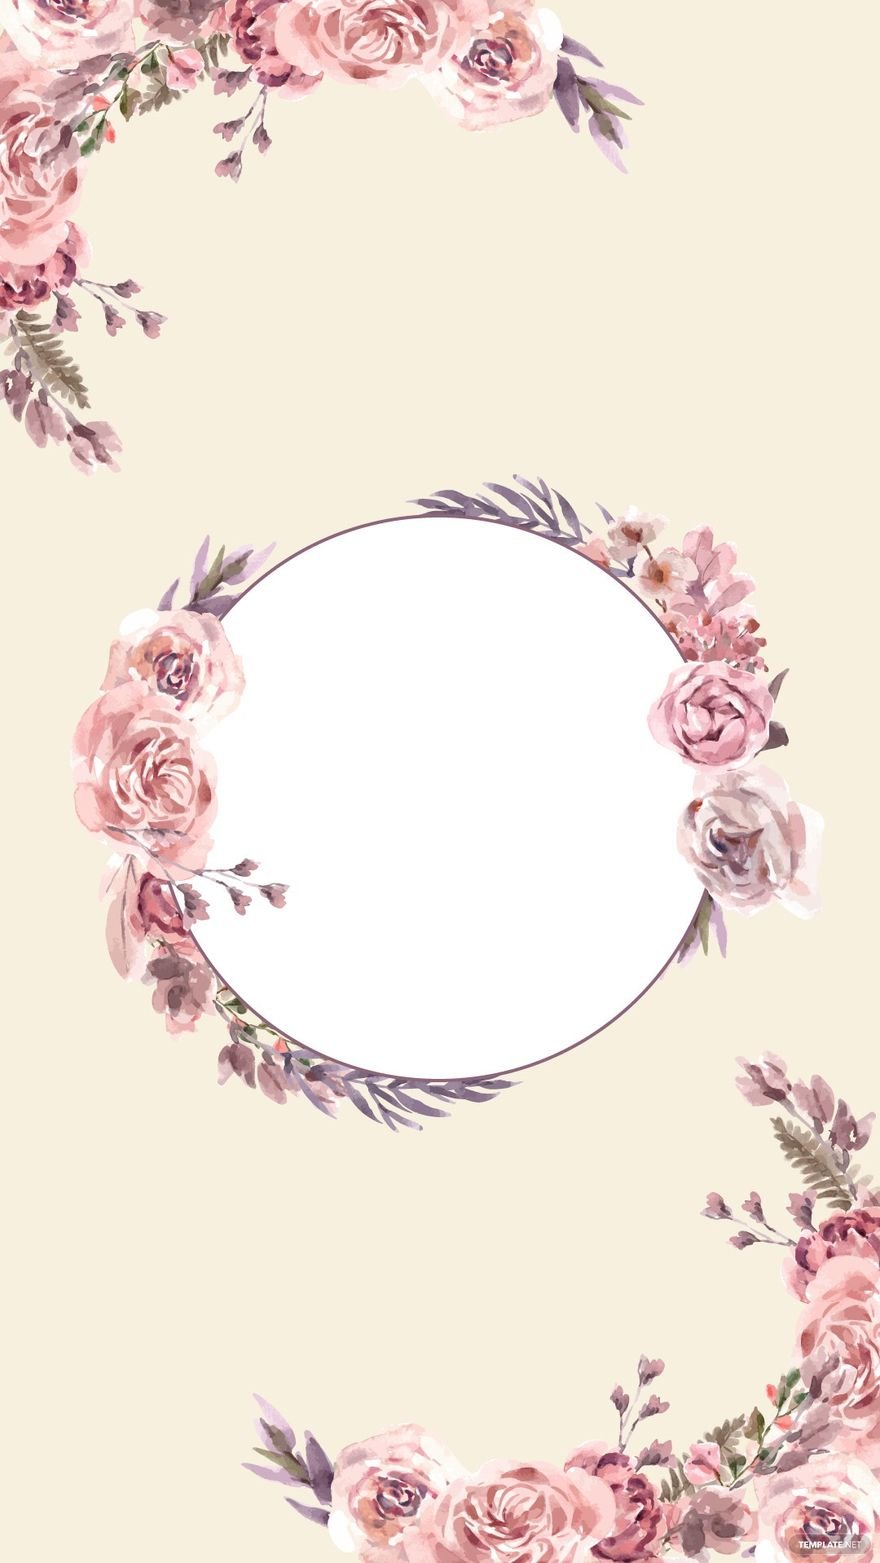 Free Watercolor Floral Wreath Background